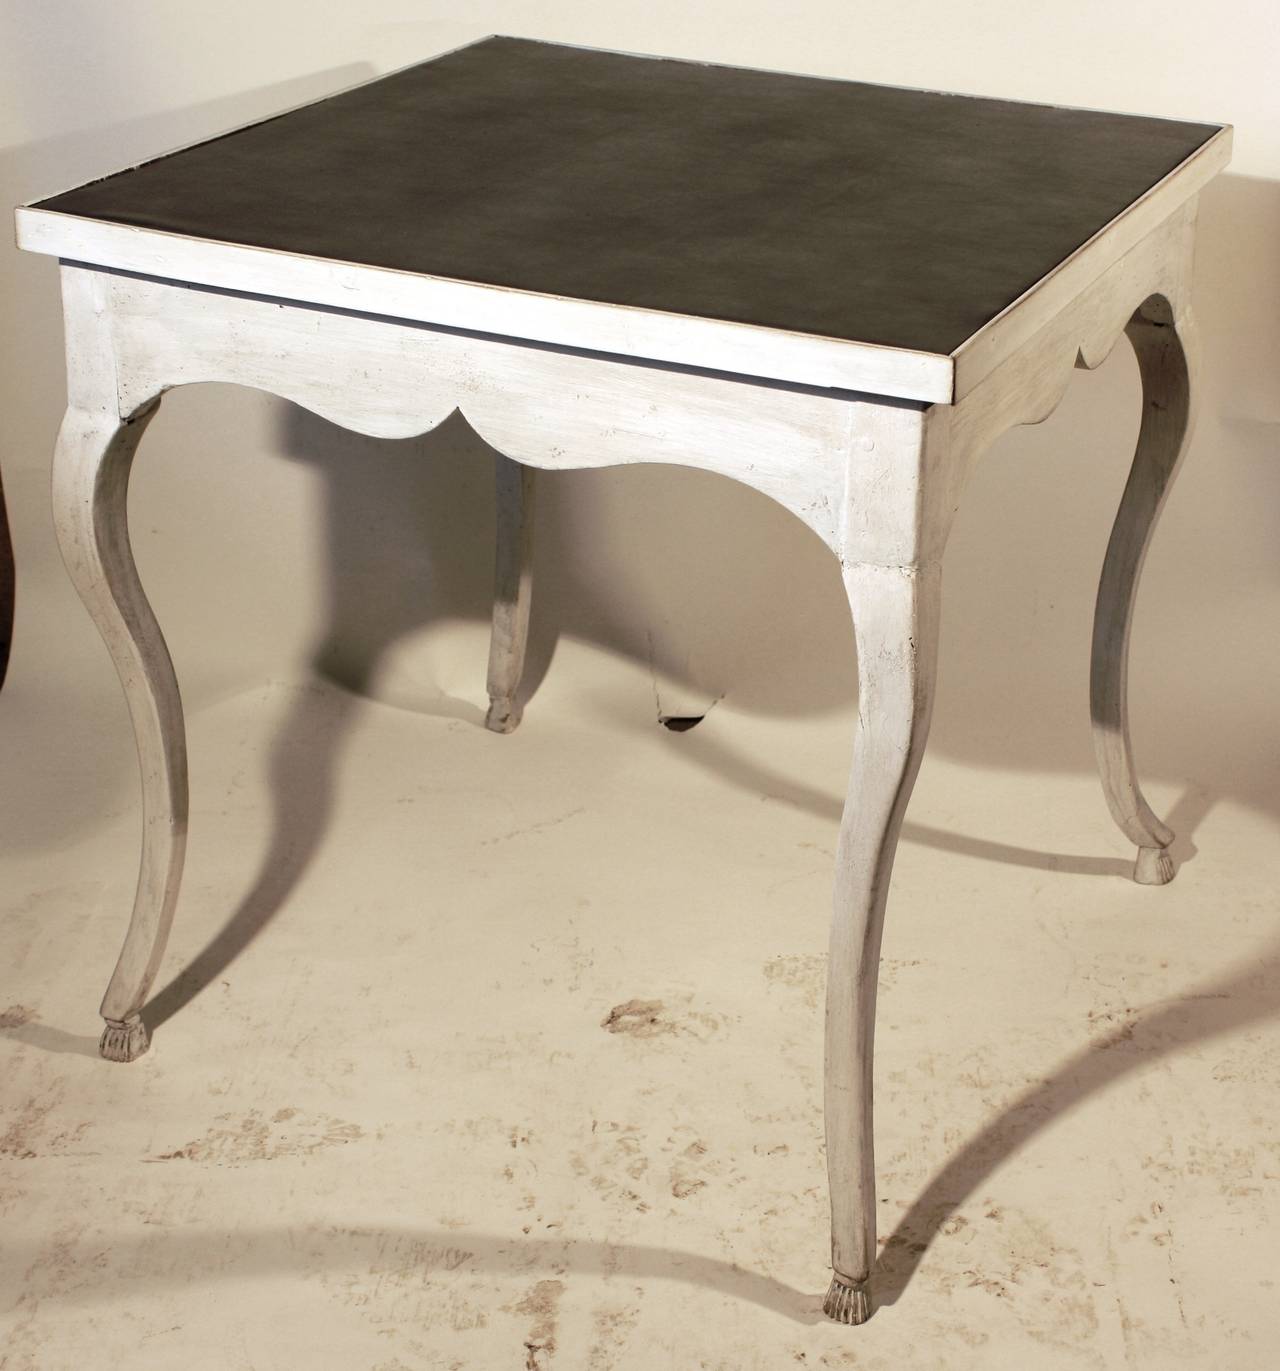 A 18th century Provincial French, Louis XV card table with grey leather top, cabriole legs with carved feet and a scalloped apron, circa 1770, in a white and grey painted finish.